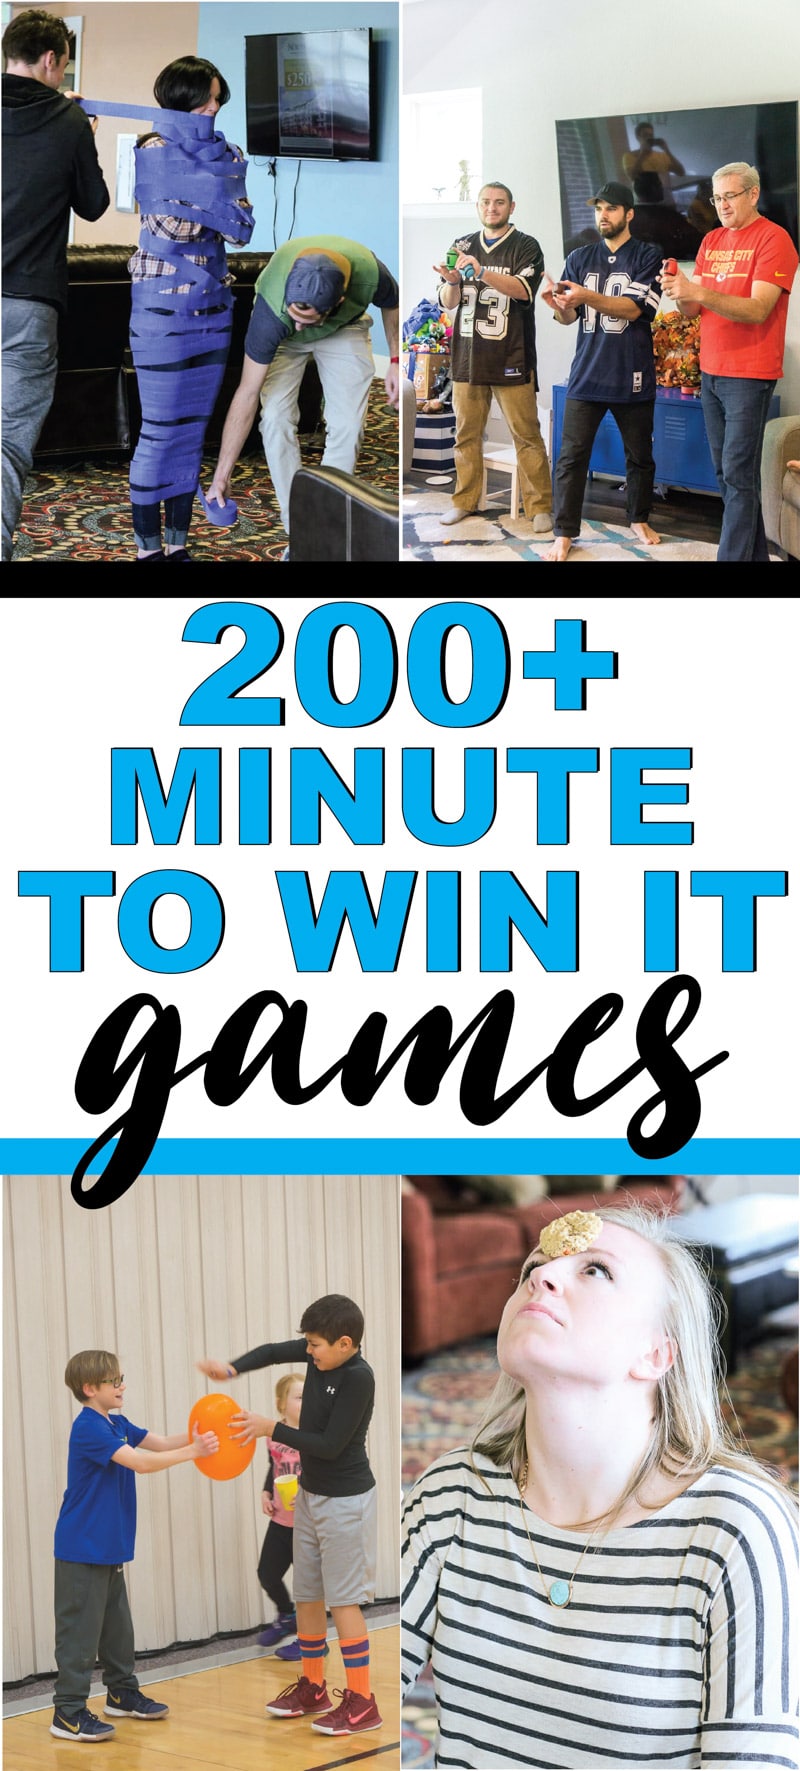 Games through which we can earn cash